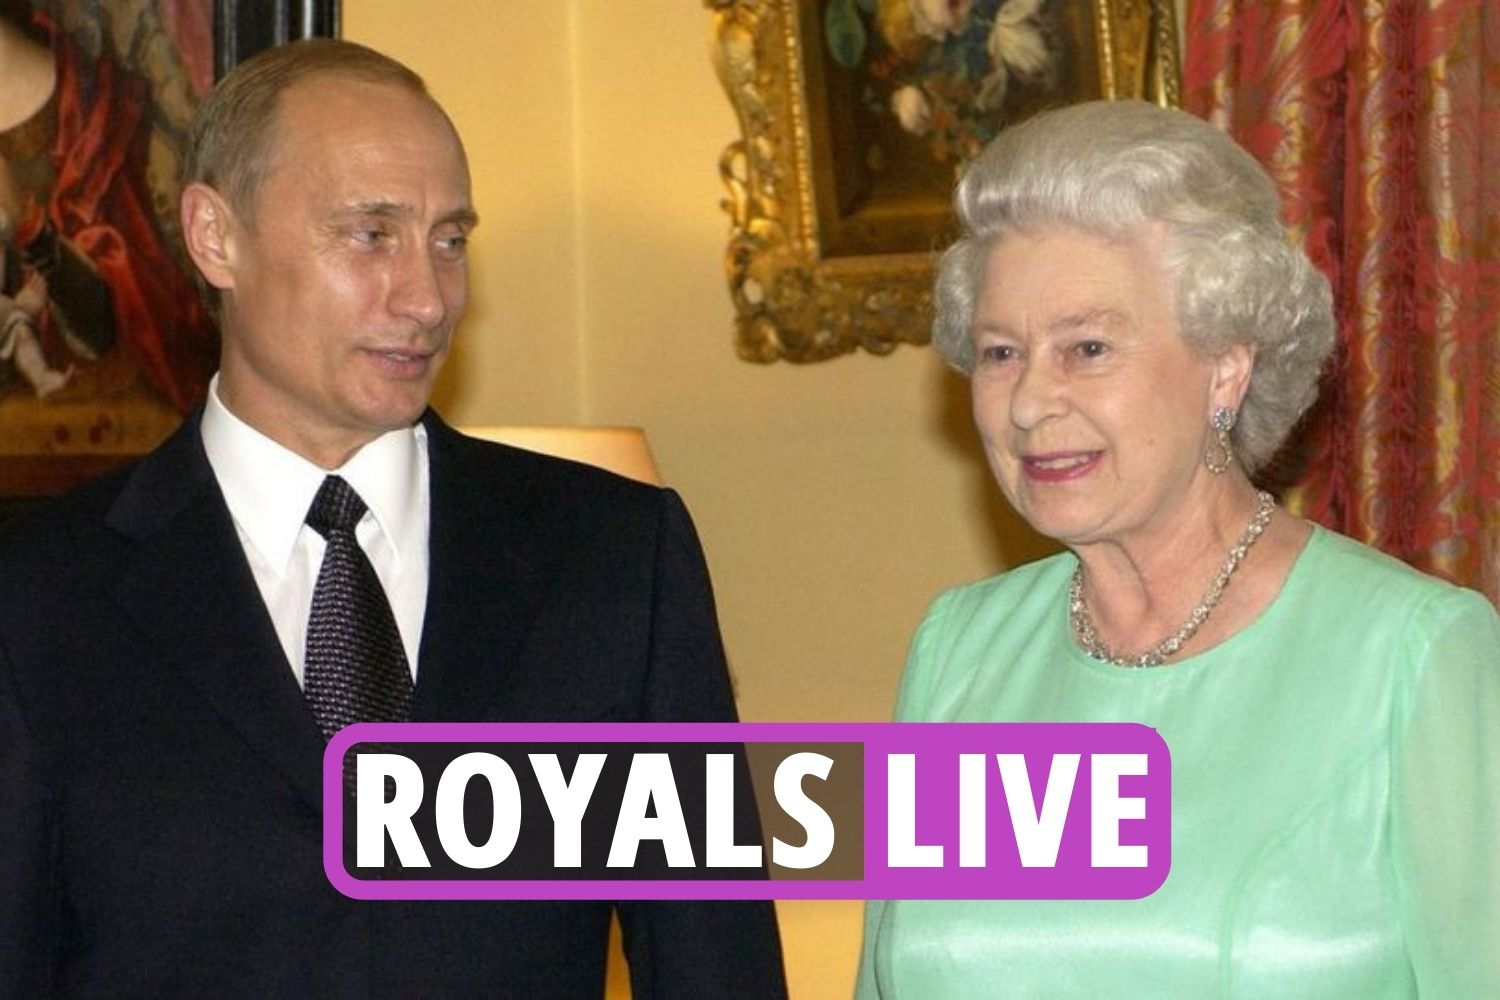 Queen once had THIS sharp putdown when Putin left her WAITING for 14 minutes